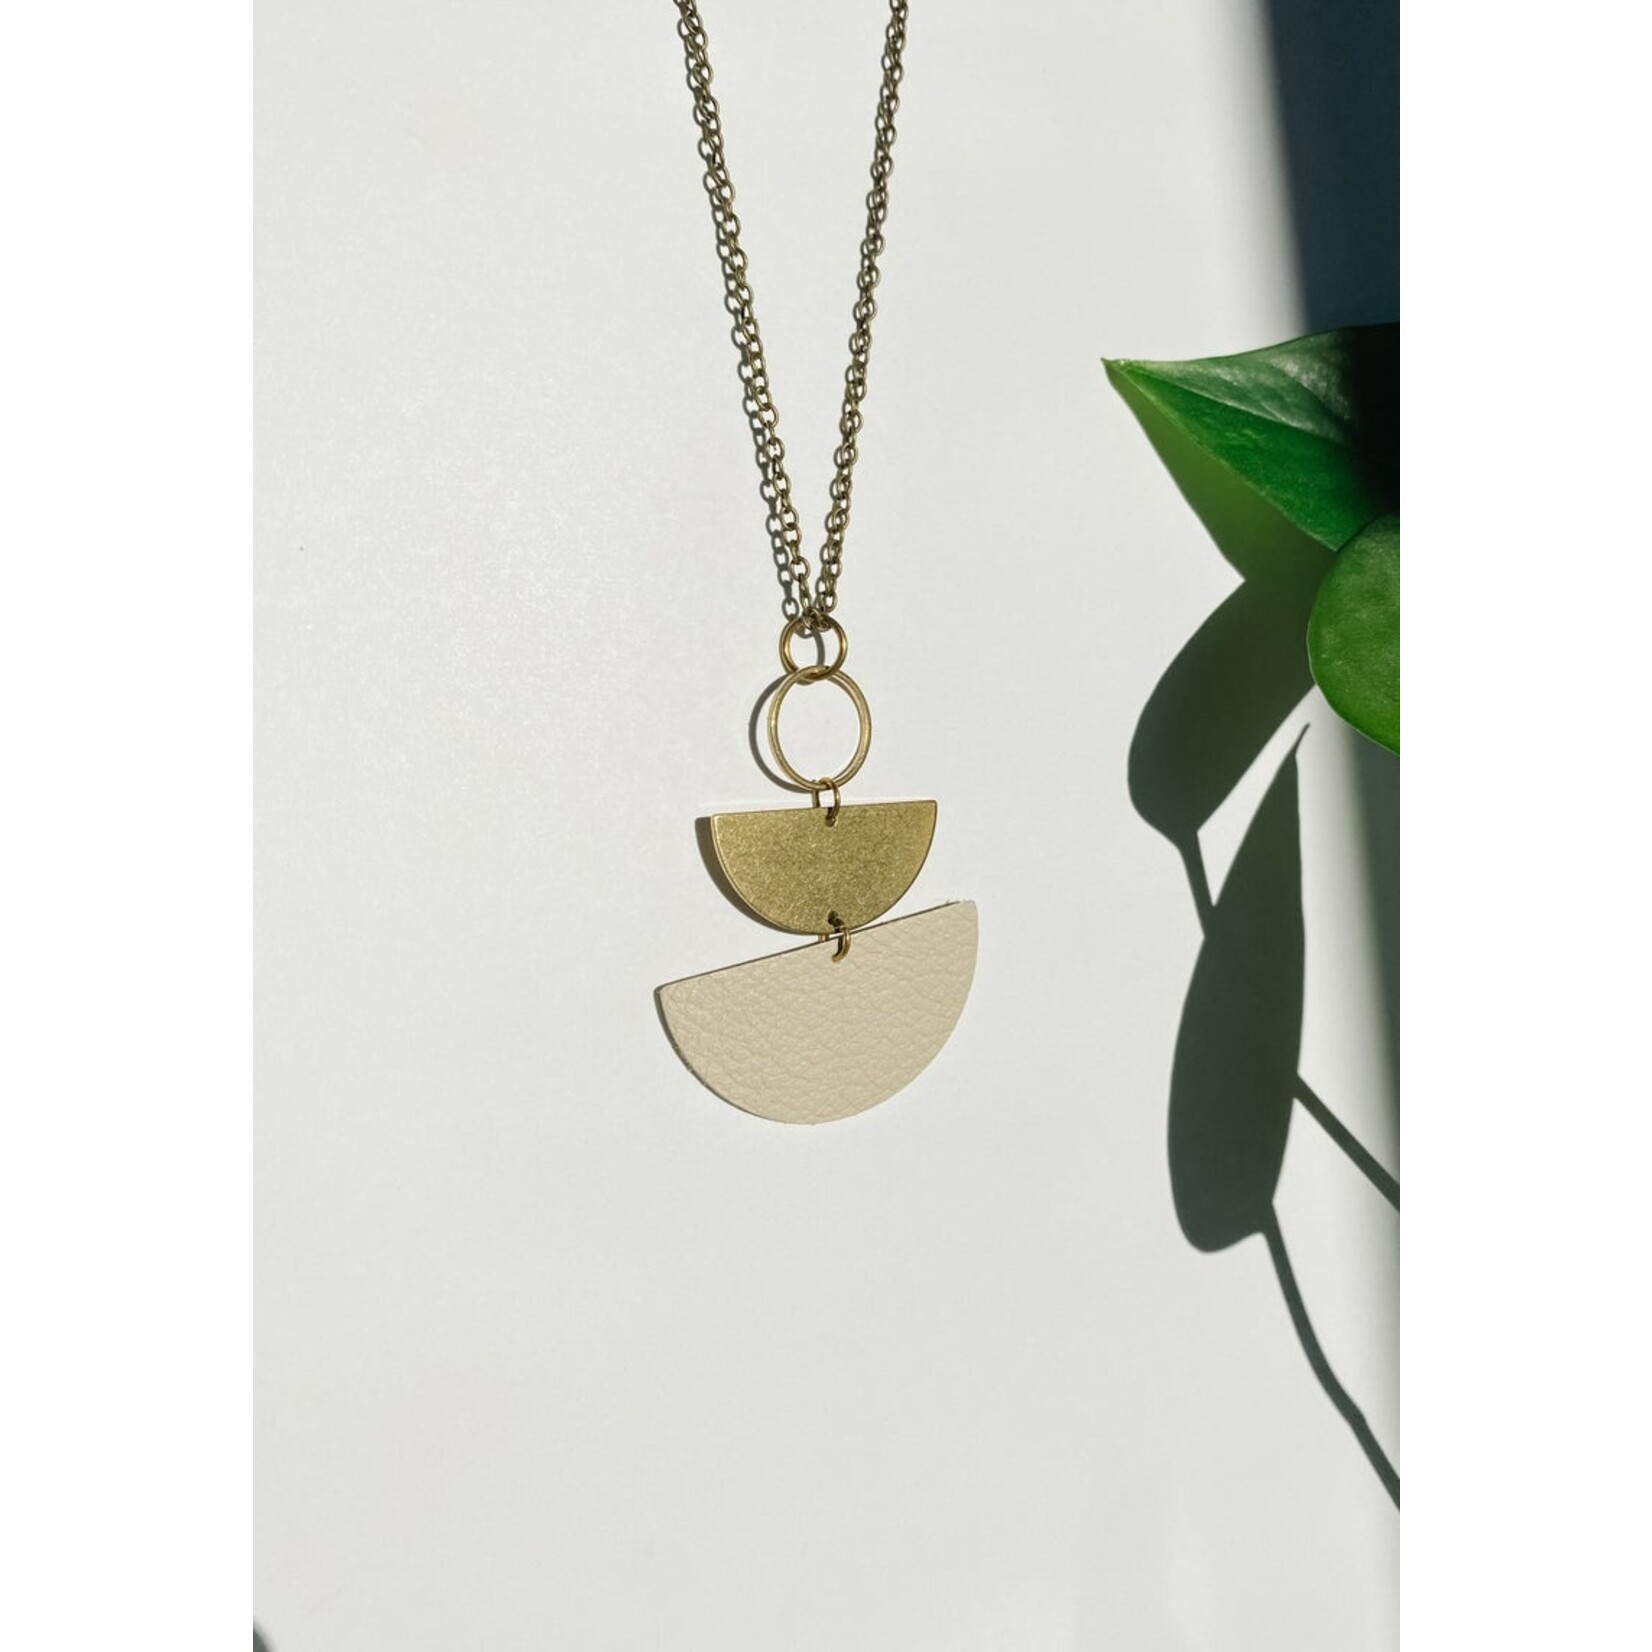 Beige Stacked Half Moon Leather Necklace